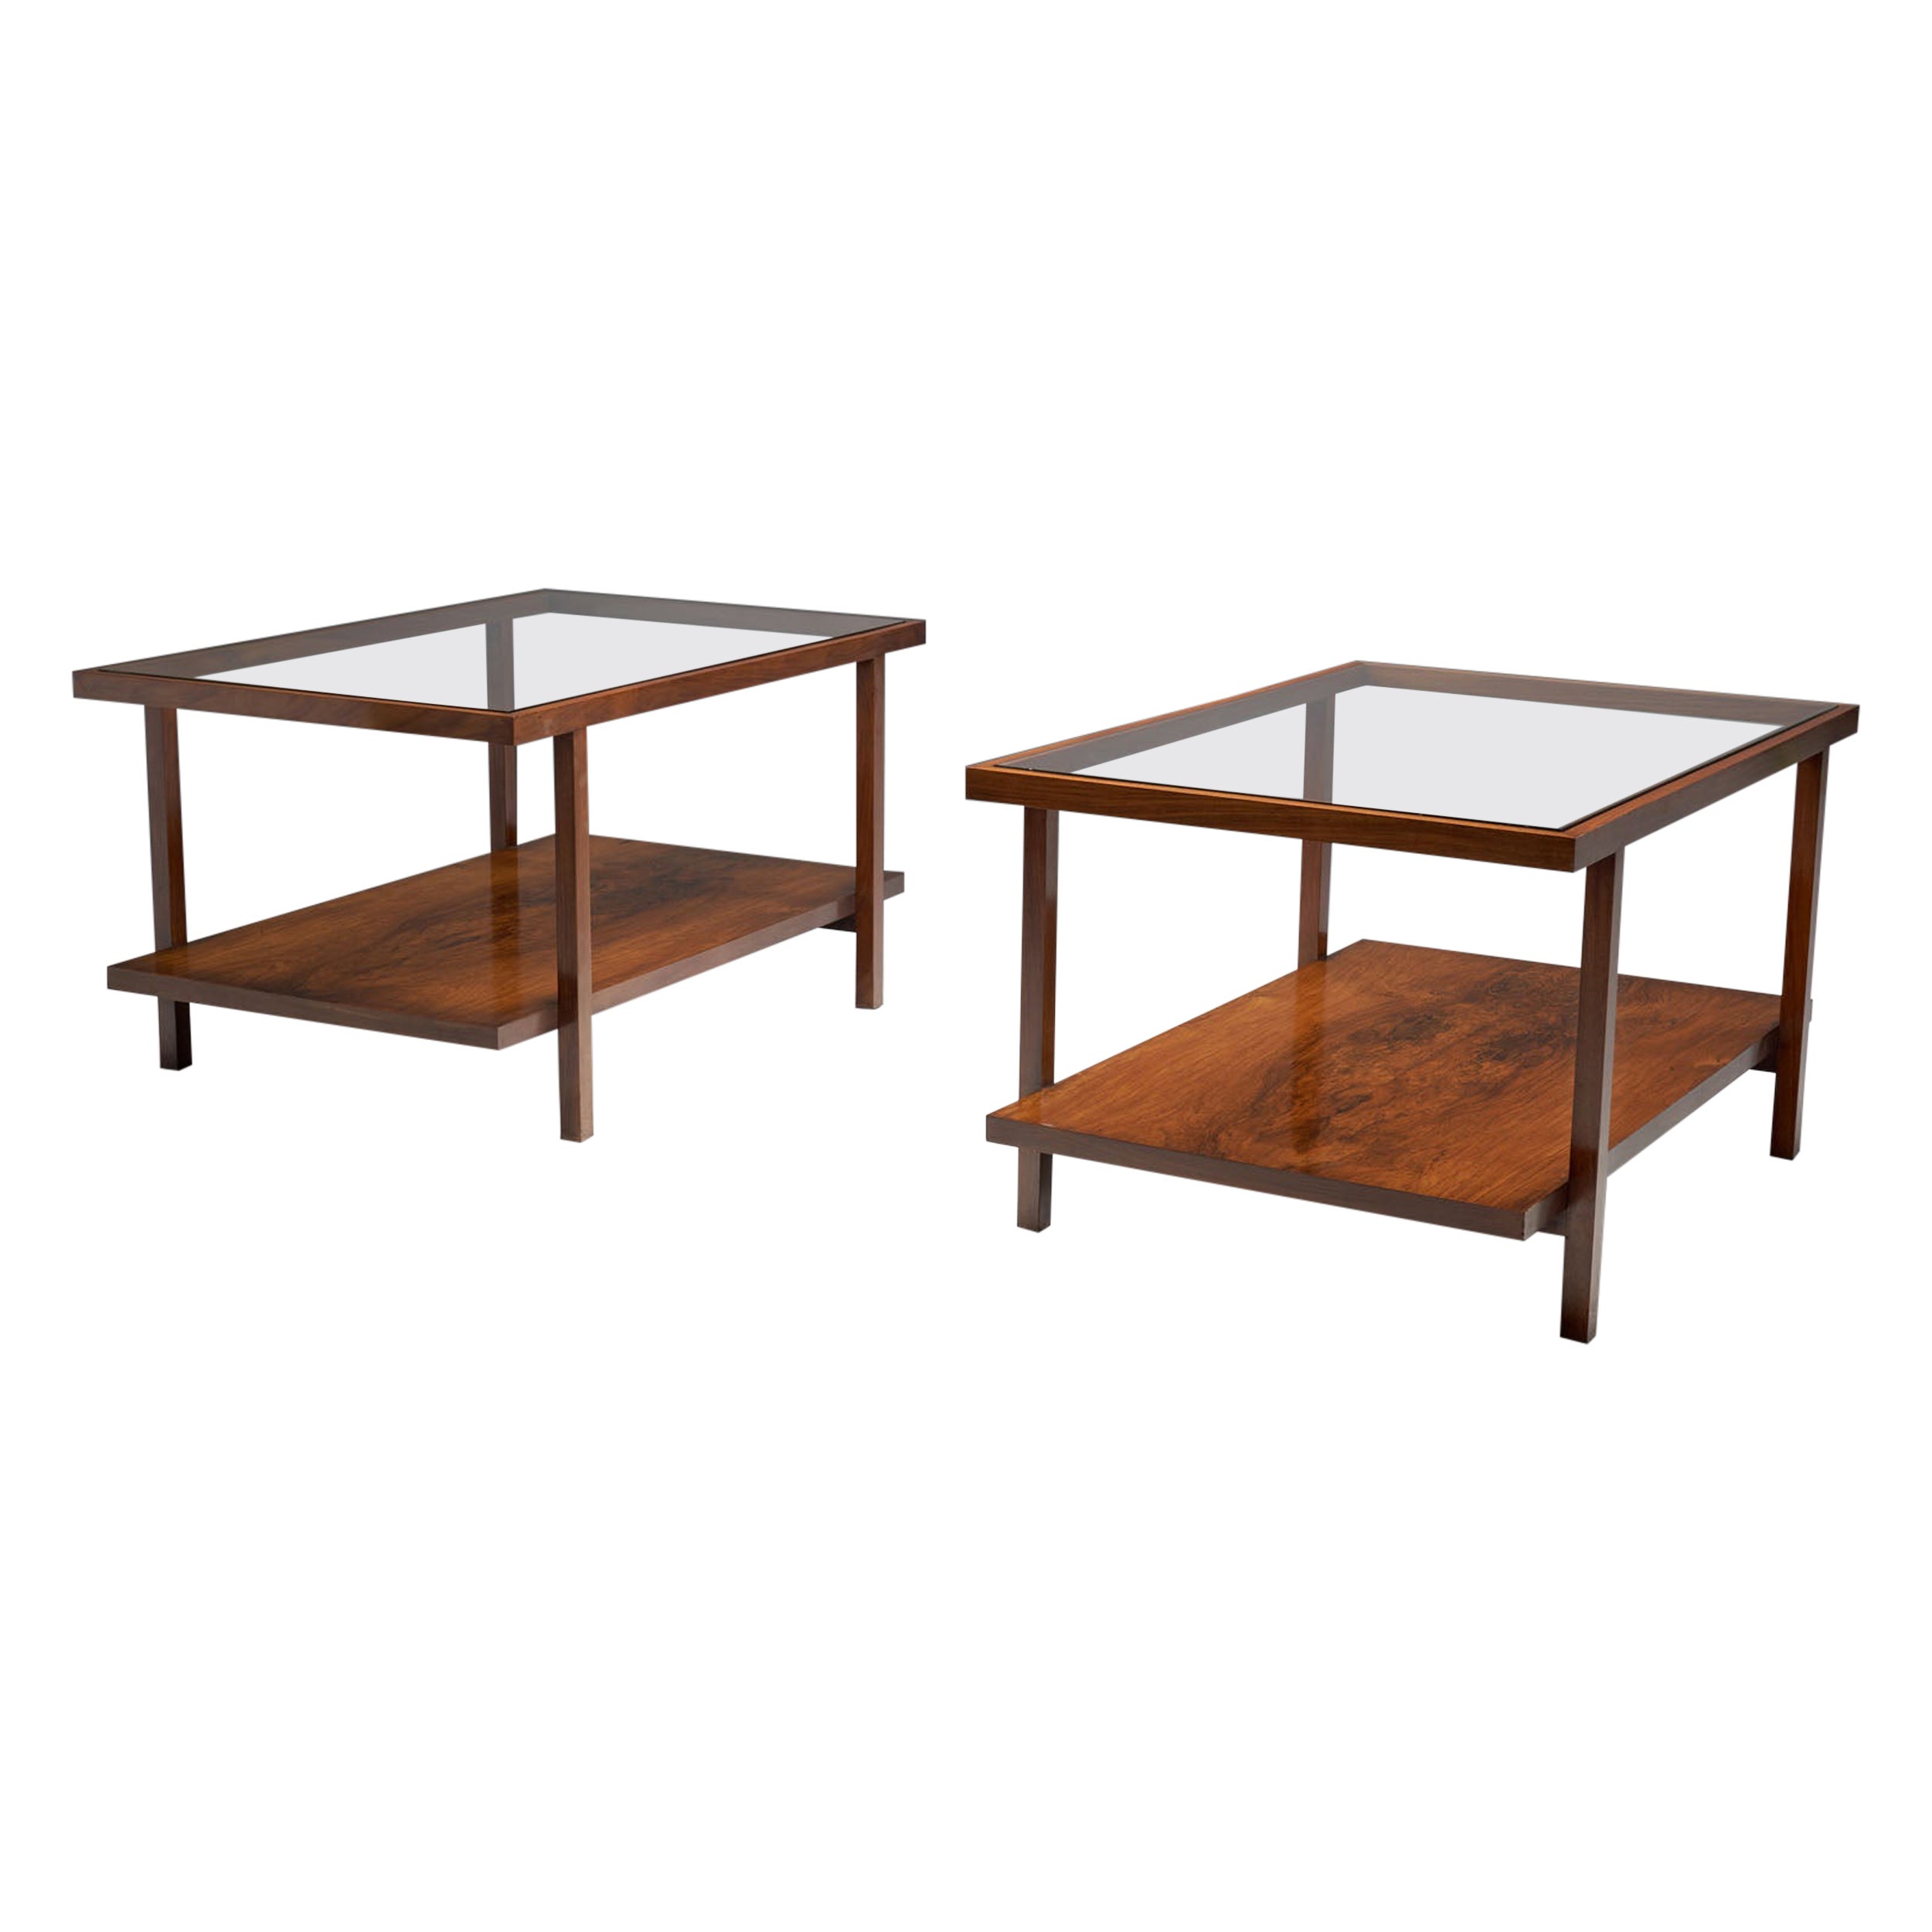 A Pair of Rectangular Branco and Preto Side Tables in Caviuna Wood, Brazil 1960s For Sale